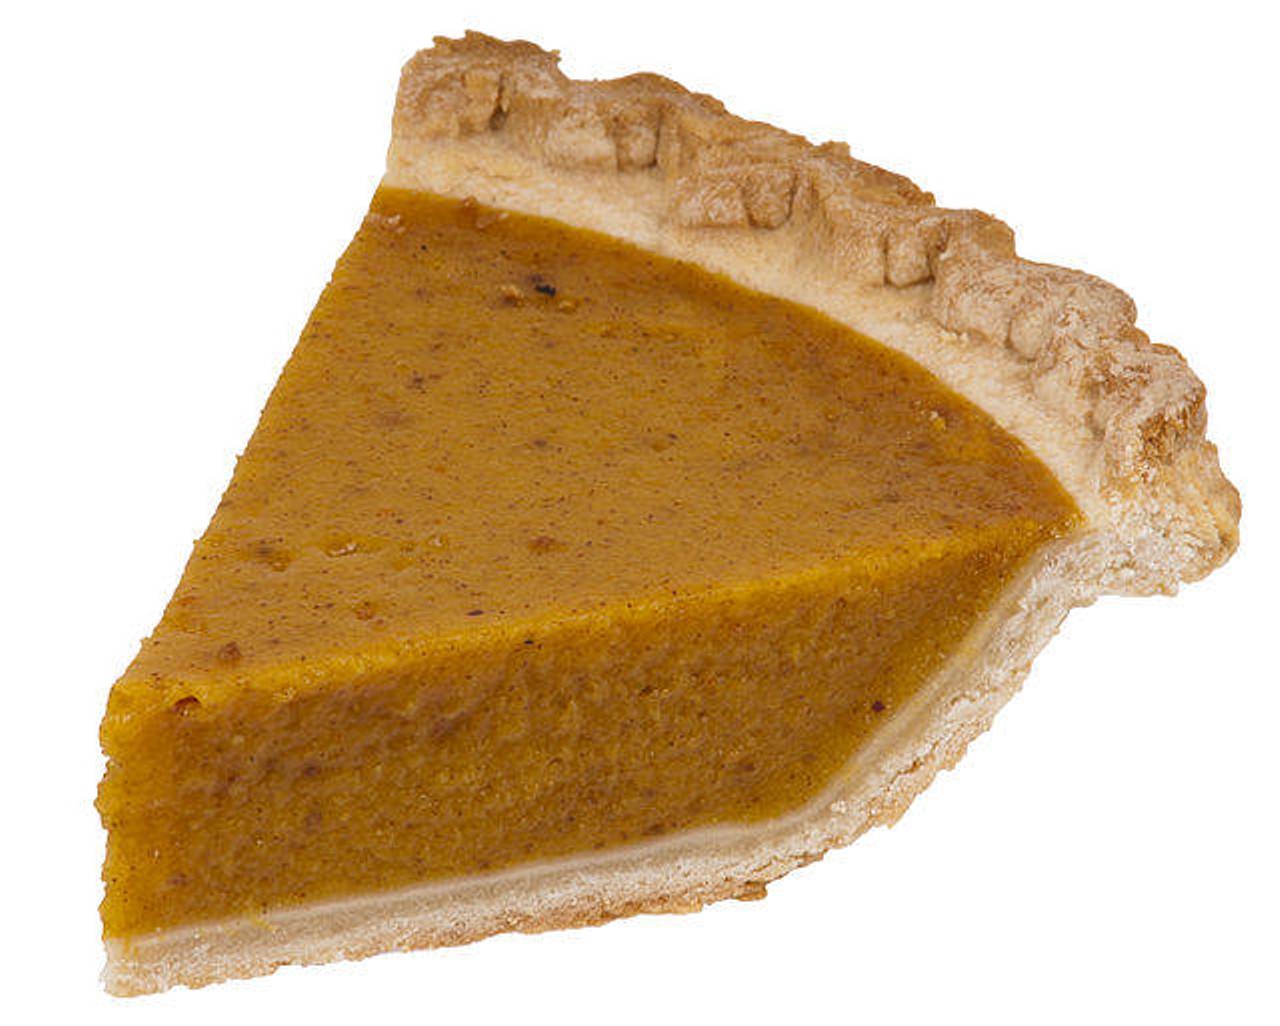 7. The world's largest pumpkin pie was made two months before Thanksgiving in 2010 in New Bremen, Ohio. It weighed 3,699 pounds and had a 20-foot diameter.